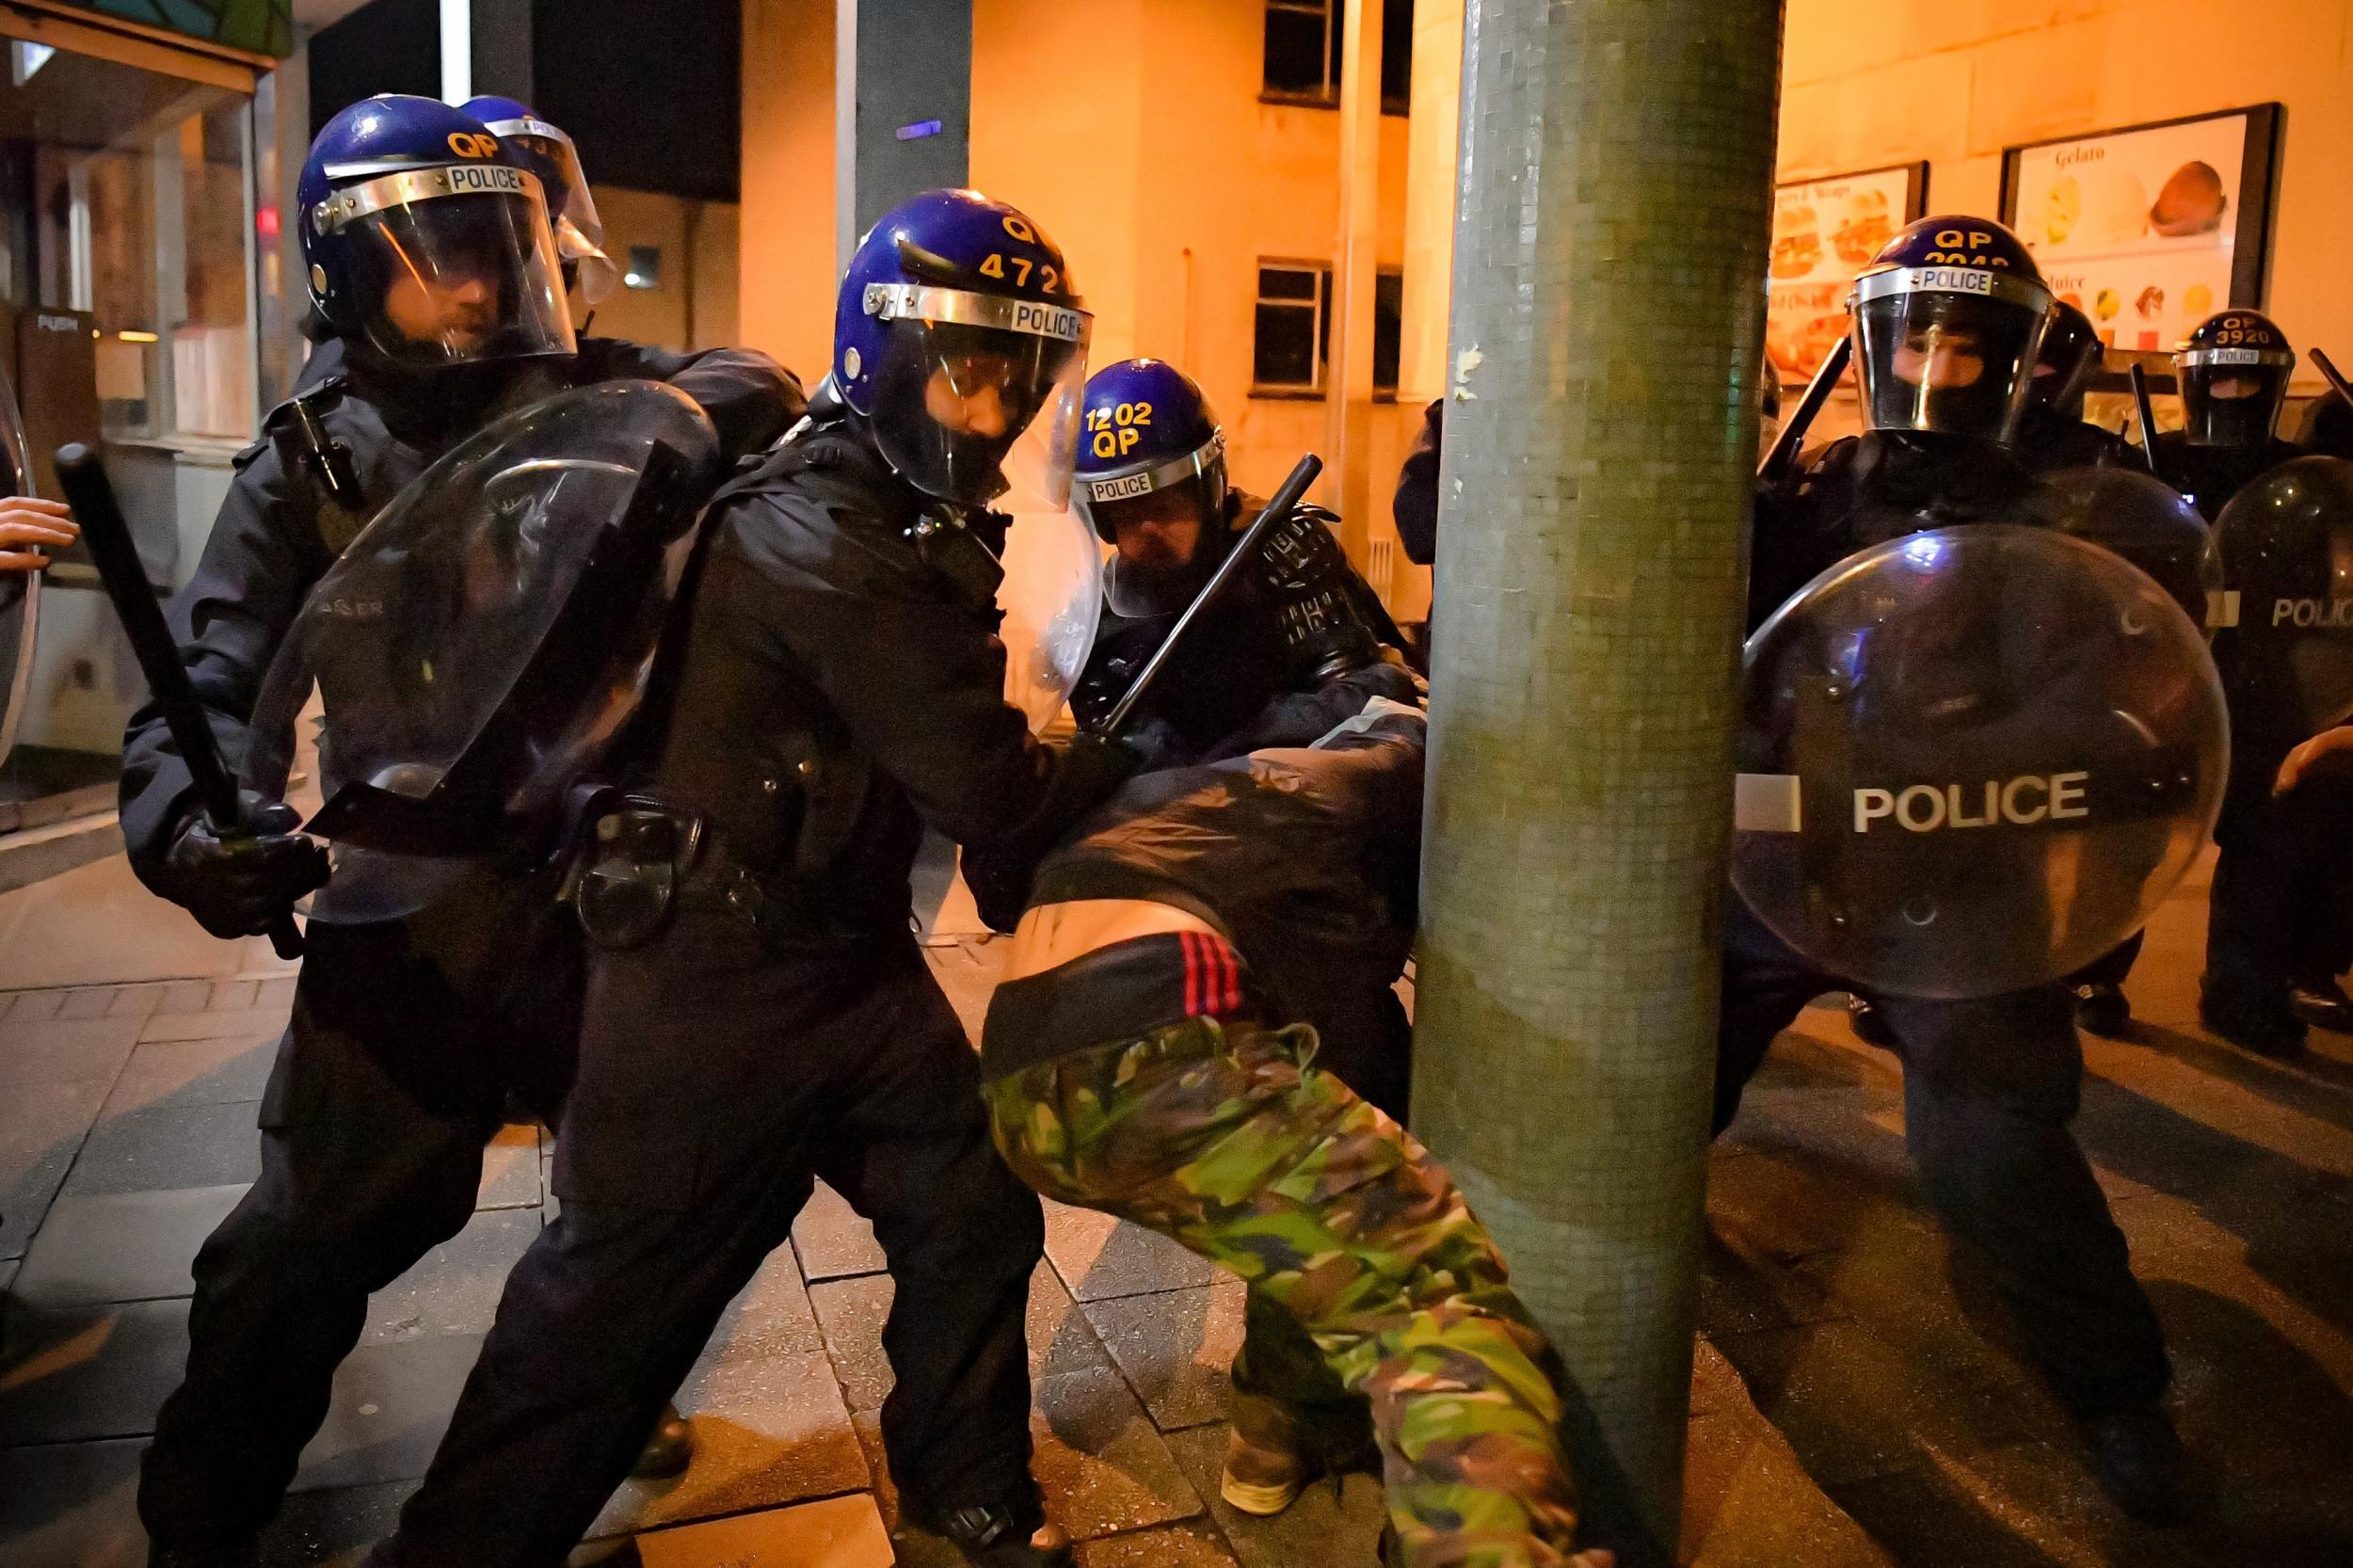 Police officers detain a man as they move in on demonstrators in Bristol in March